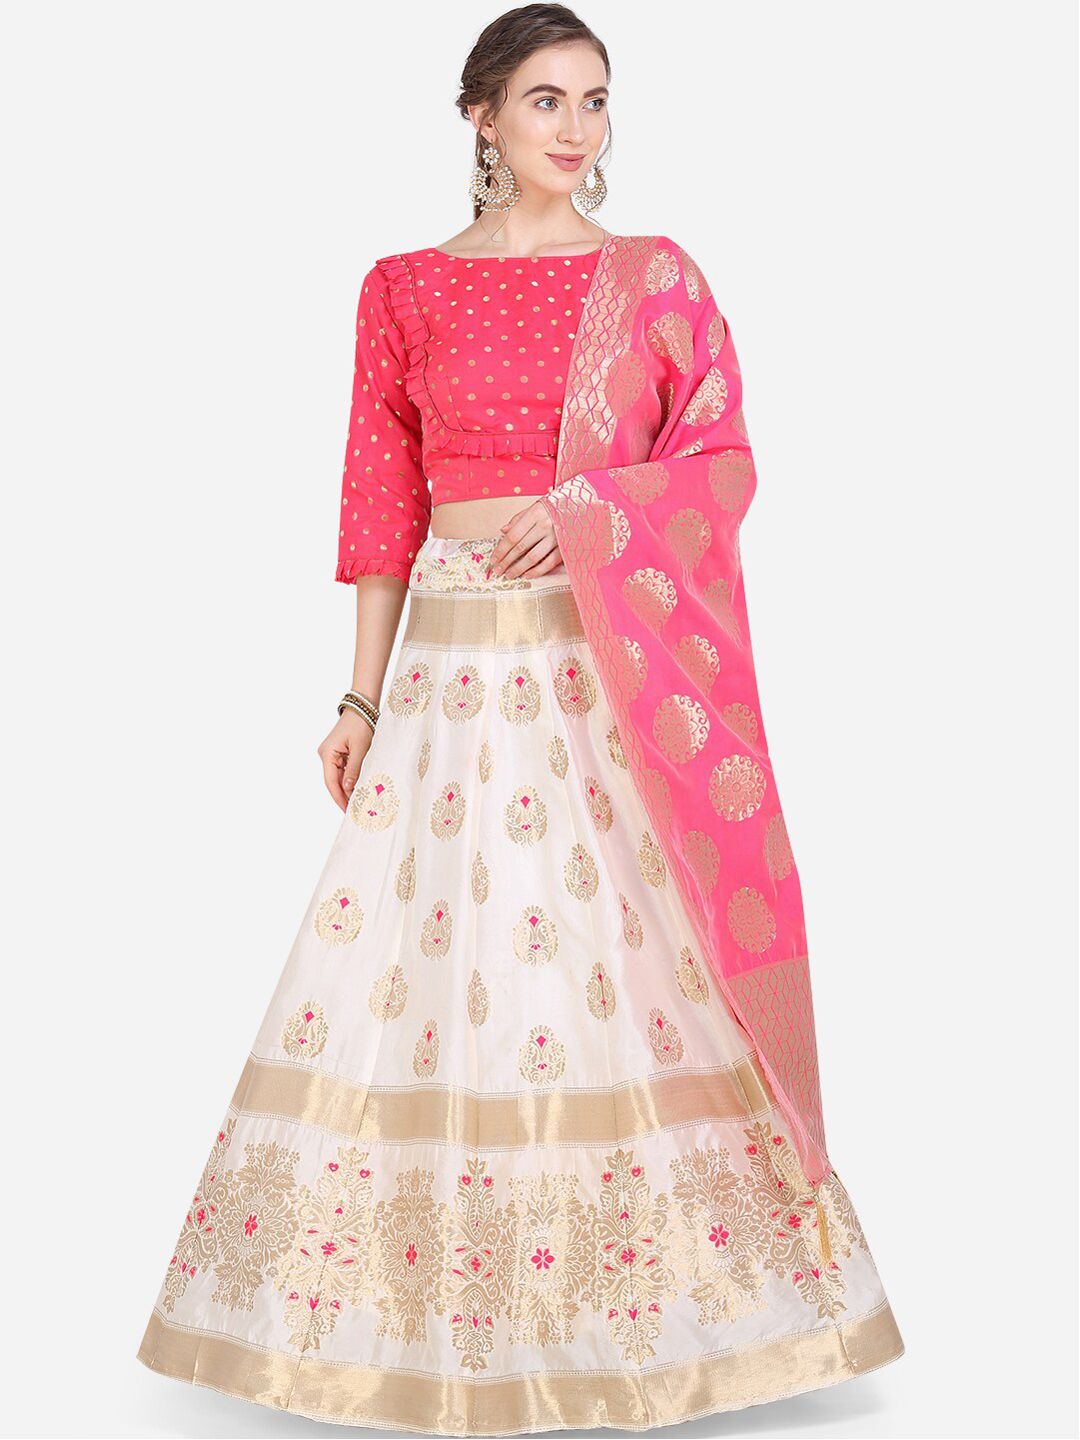 PURVAJA White & Pink Woven Design Semi-Stitched Lehenga & Unstitched Blouse with Dupatta Price in India